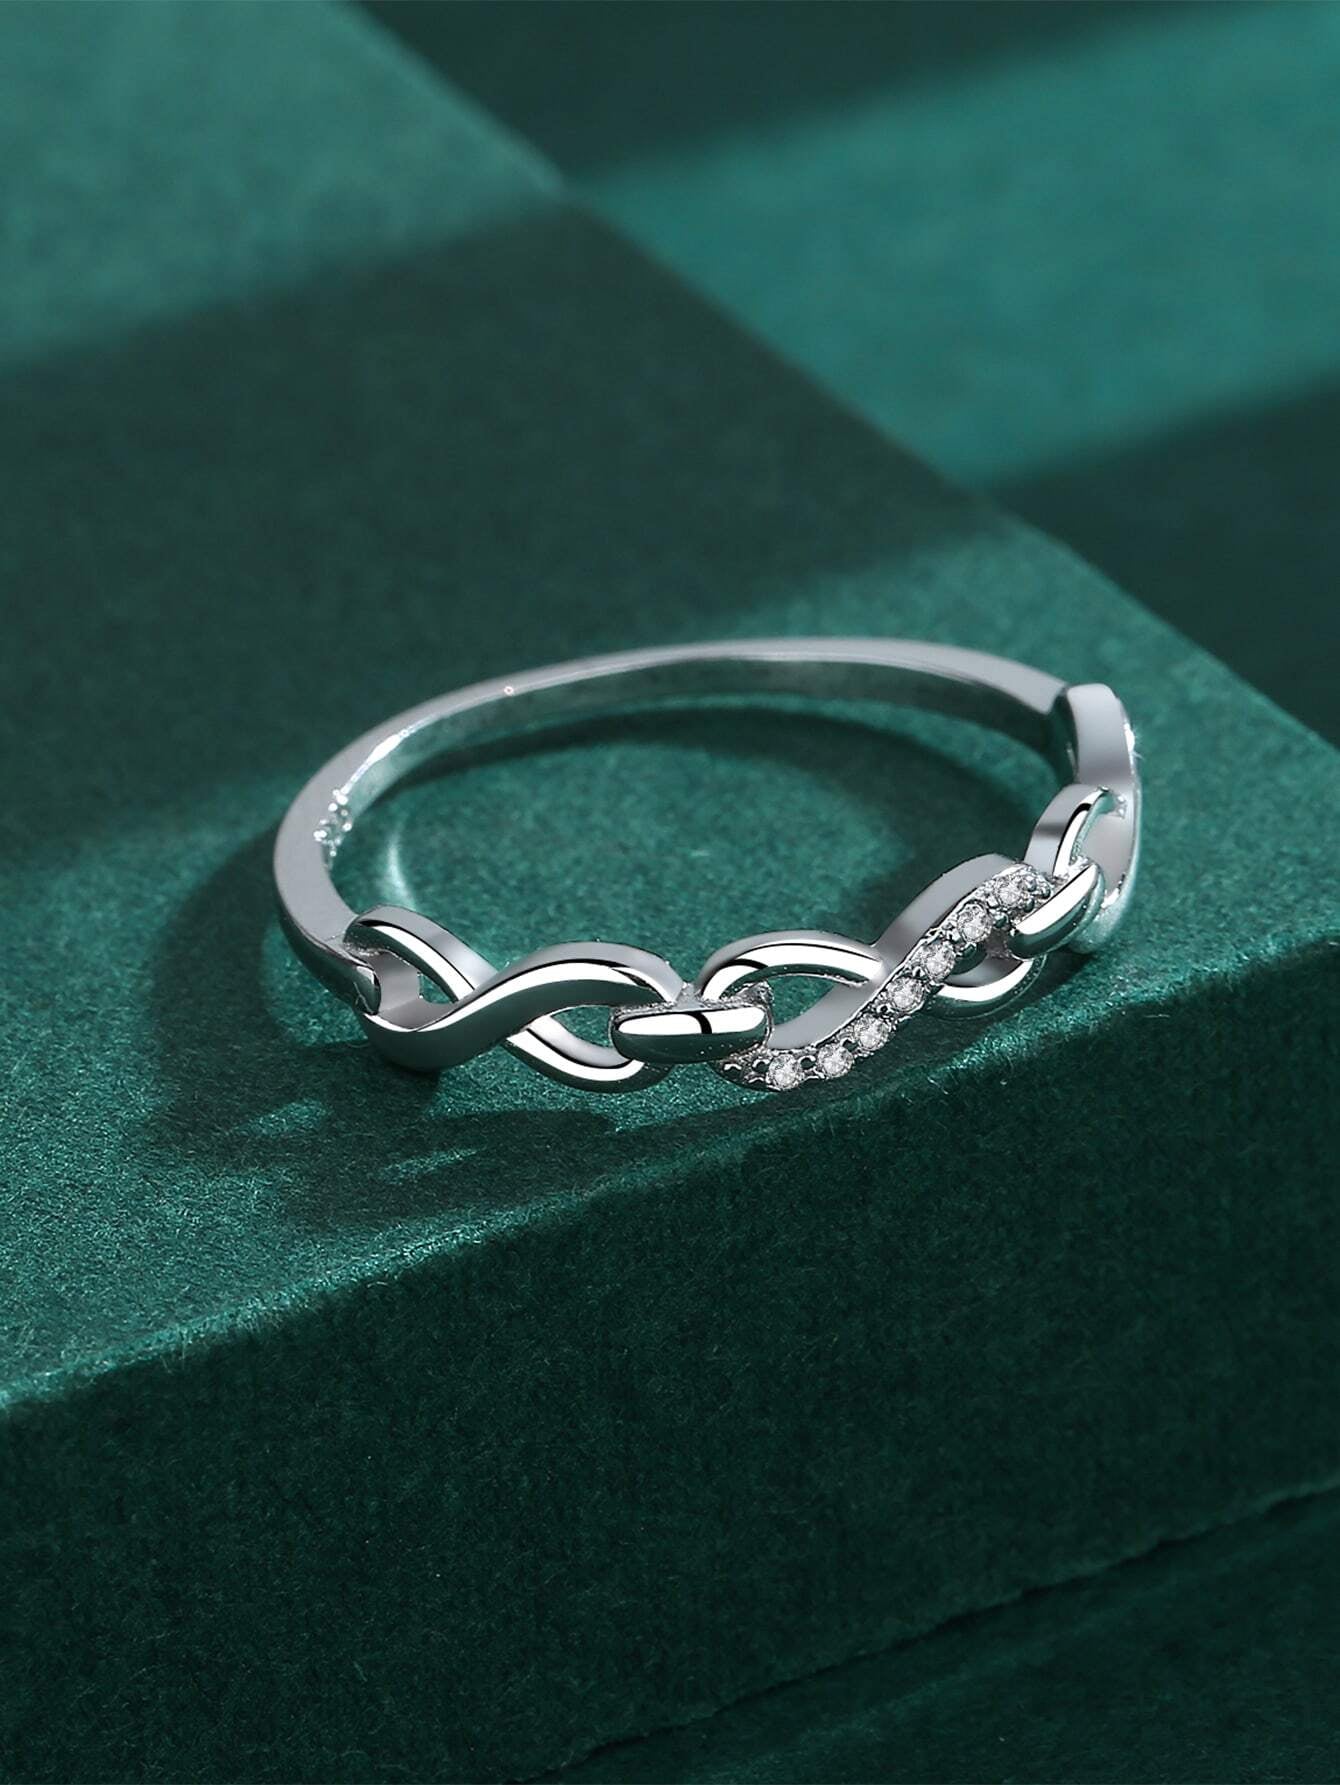 925 Sterling Silver Ring with Uncommon Geometric Design - Intended for Both Finger and Pinky, Designed for Women.